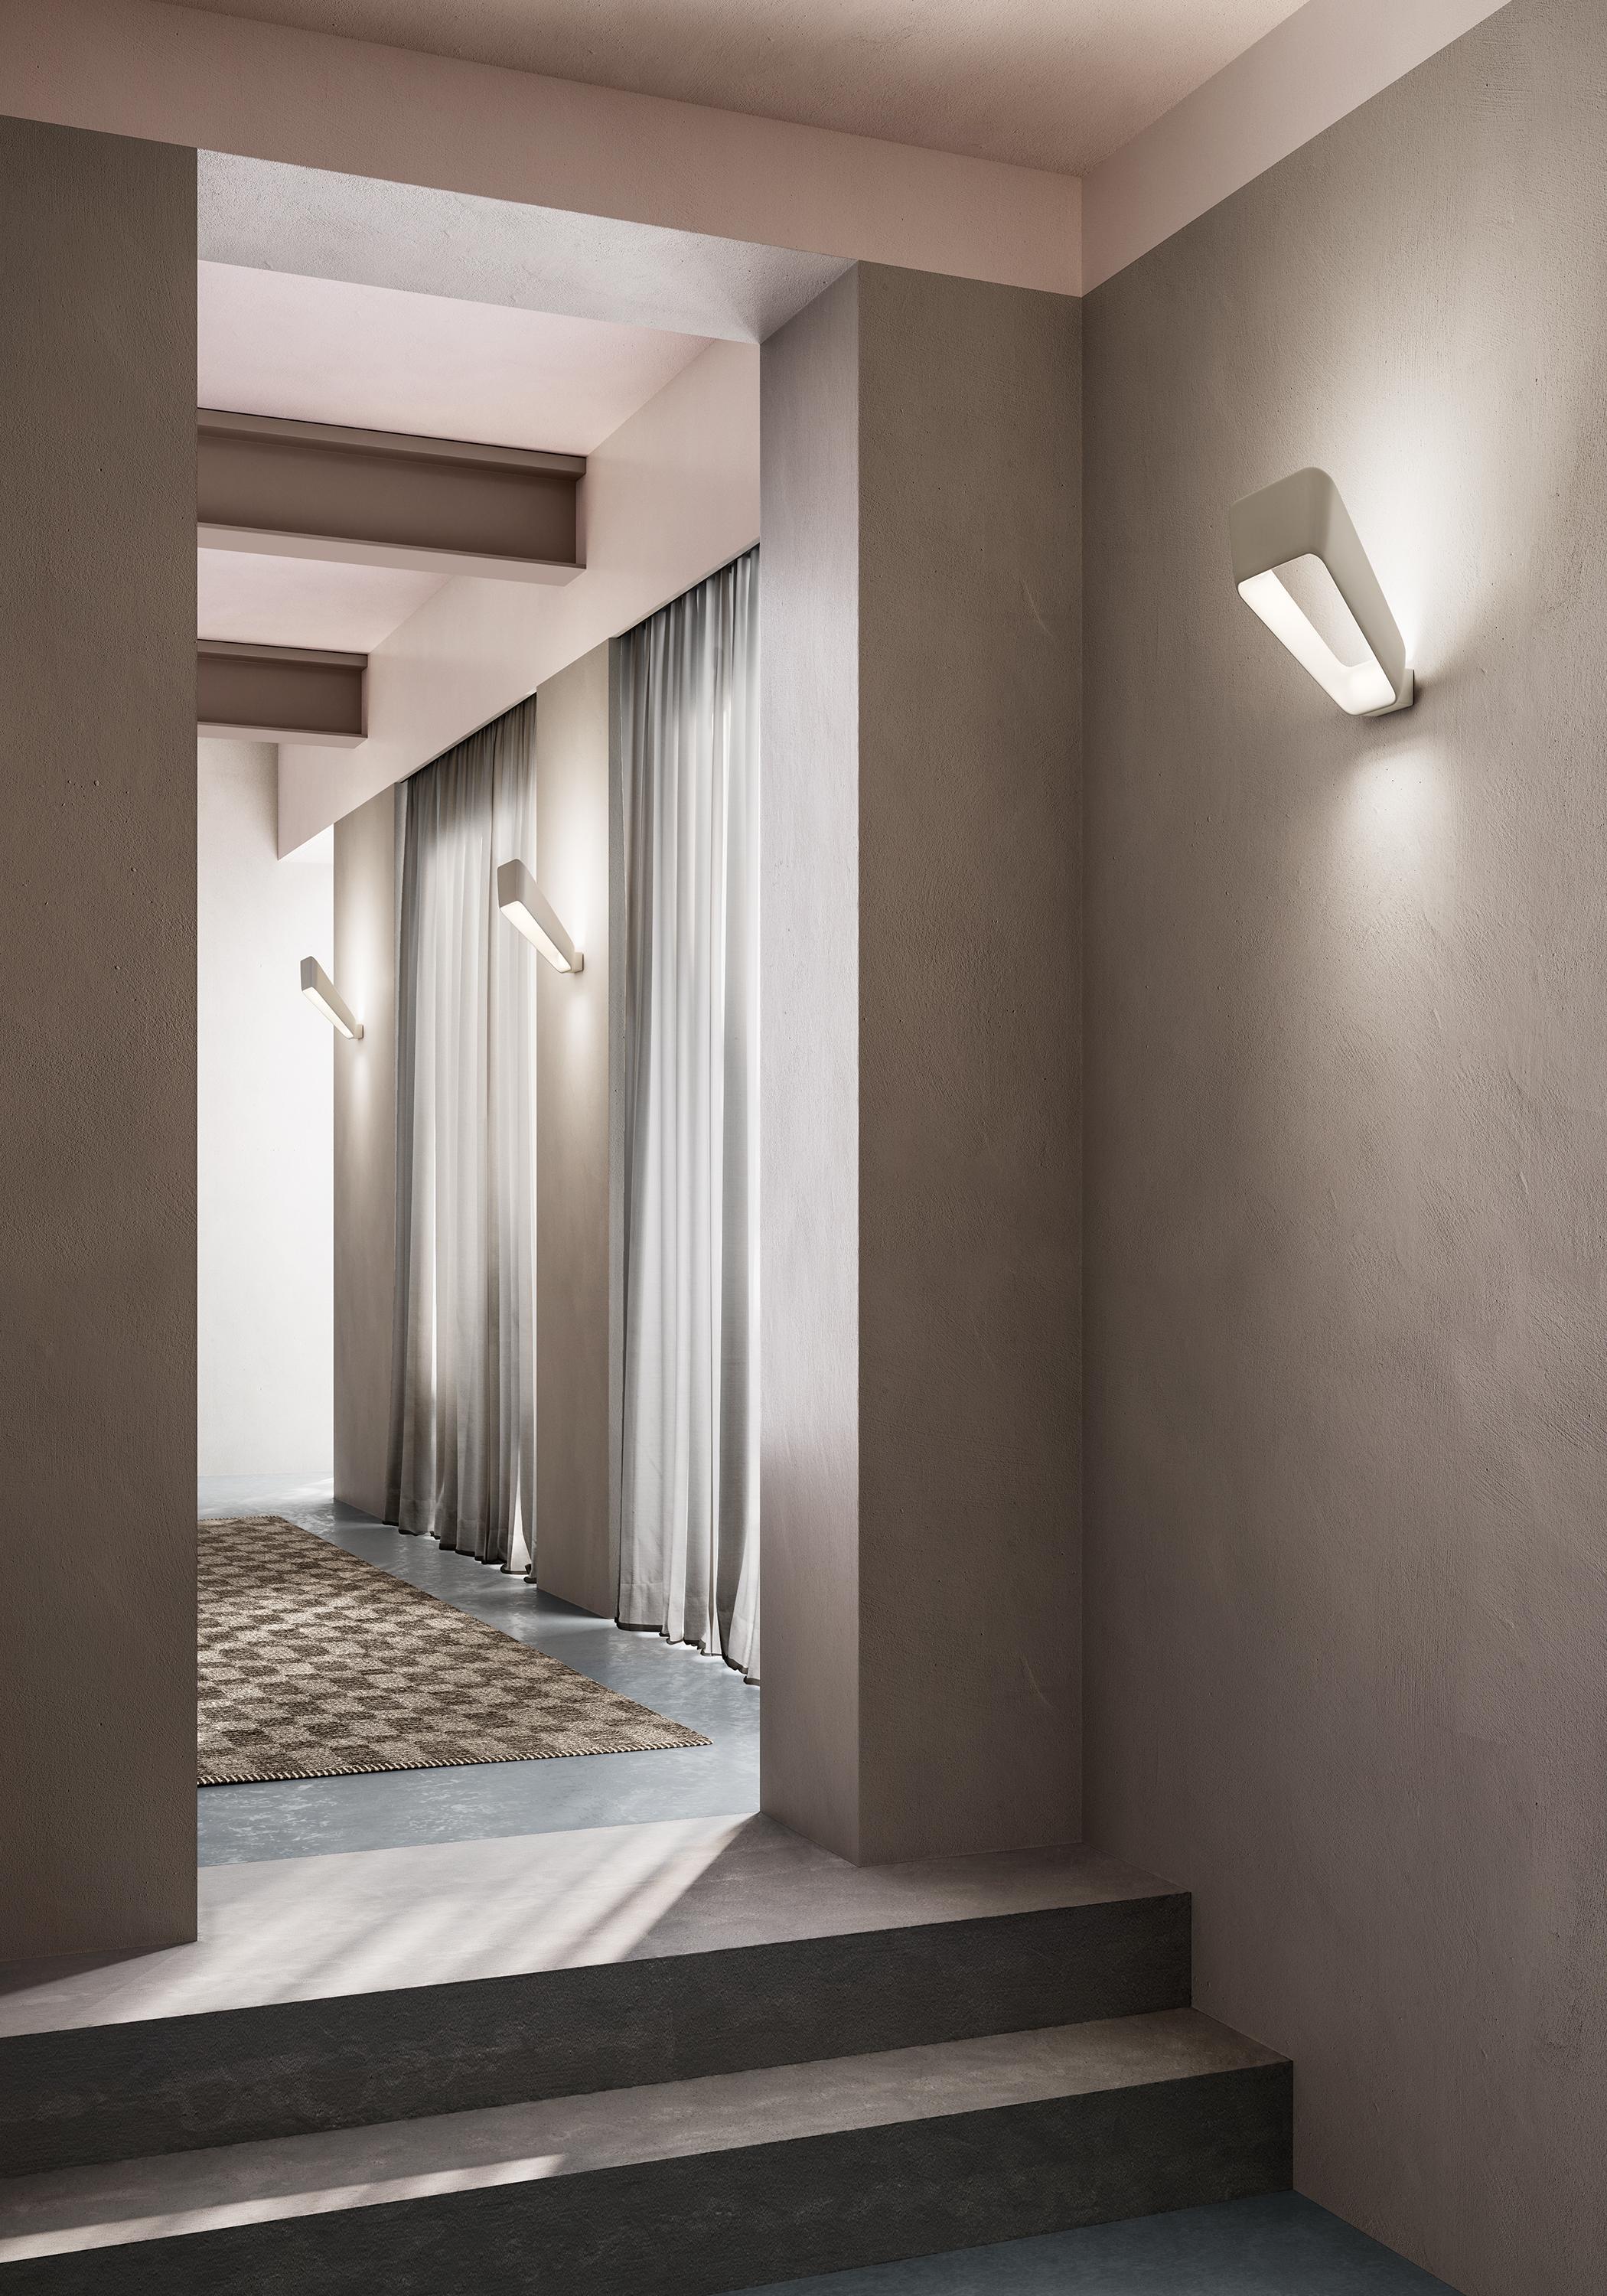 Frame chrome finish

Frame surrounds the light, diffusing it on the walls and enhancing it. Austere architectural design for a linear and compact wall light. Purity, solidity and lightness are the result of an extensive research project and